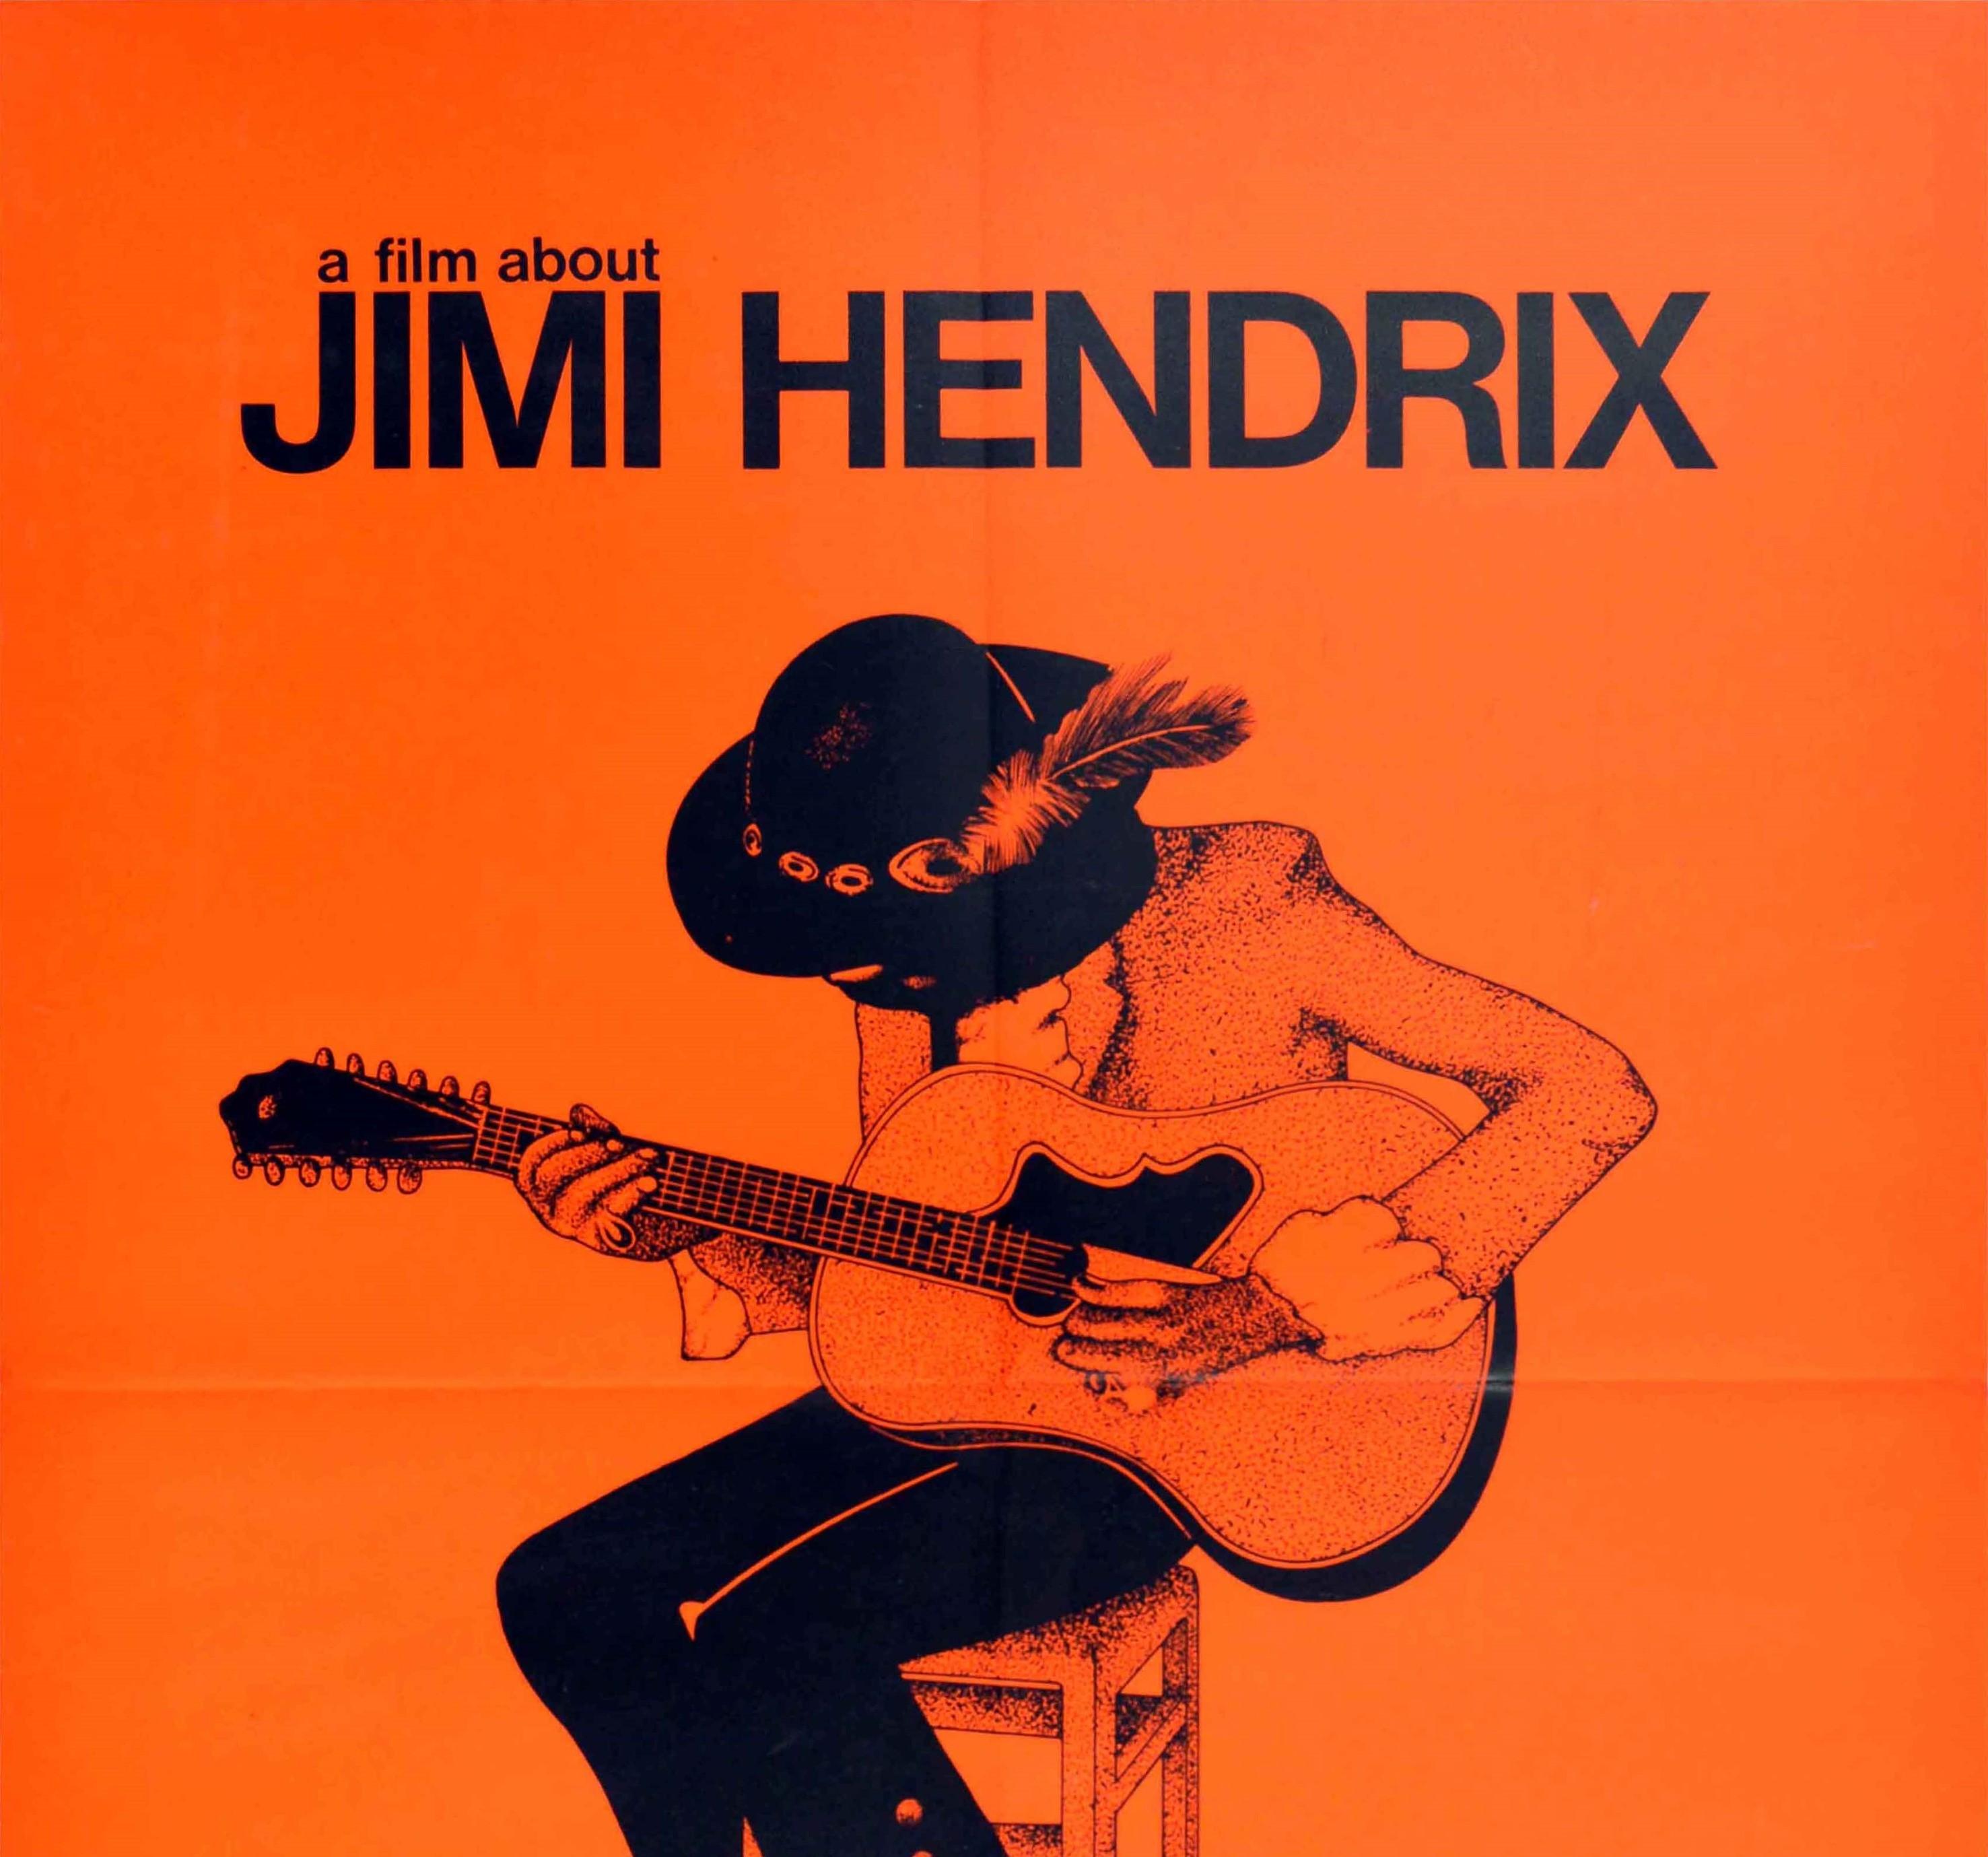 Original vintage movie poster for the 1973 documentary A Film About Jimi Hendrix directed by Joe Boyd, John Head and Gary Weis for Warner Bros featuring music concert footage of the influential American musician, singer and songwriter Jimi Hendrix